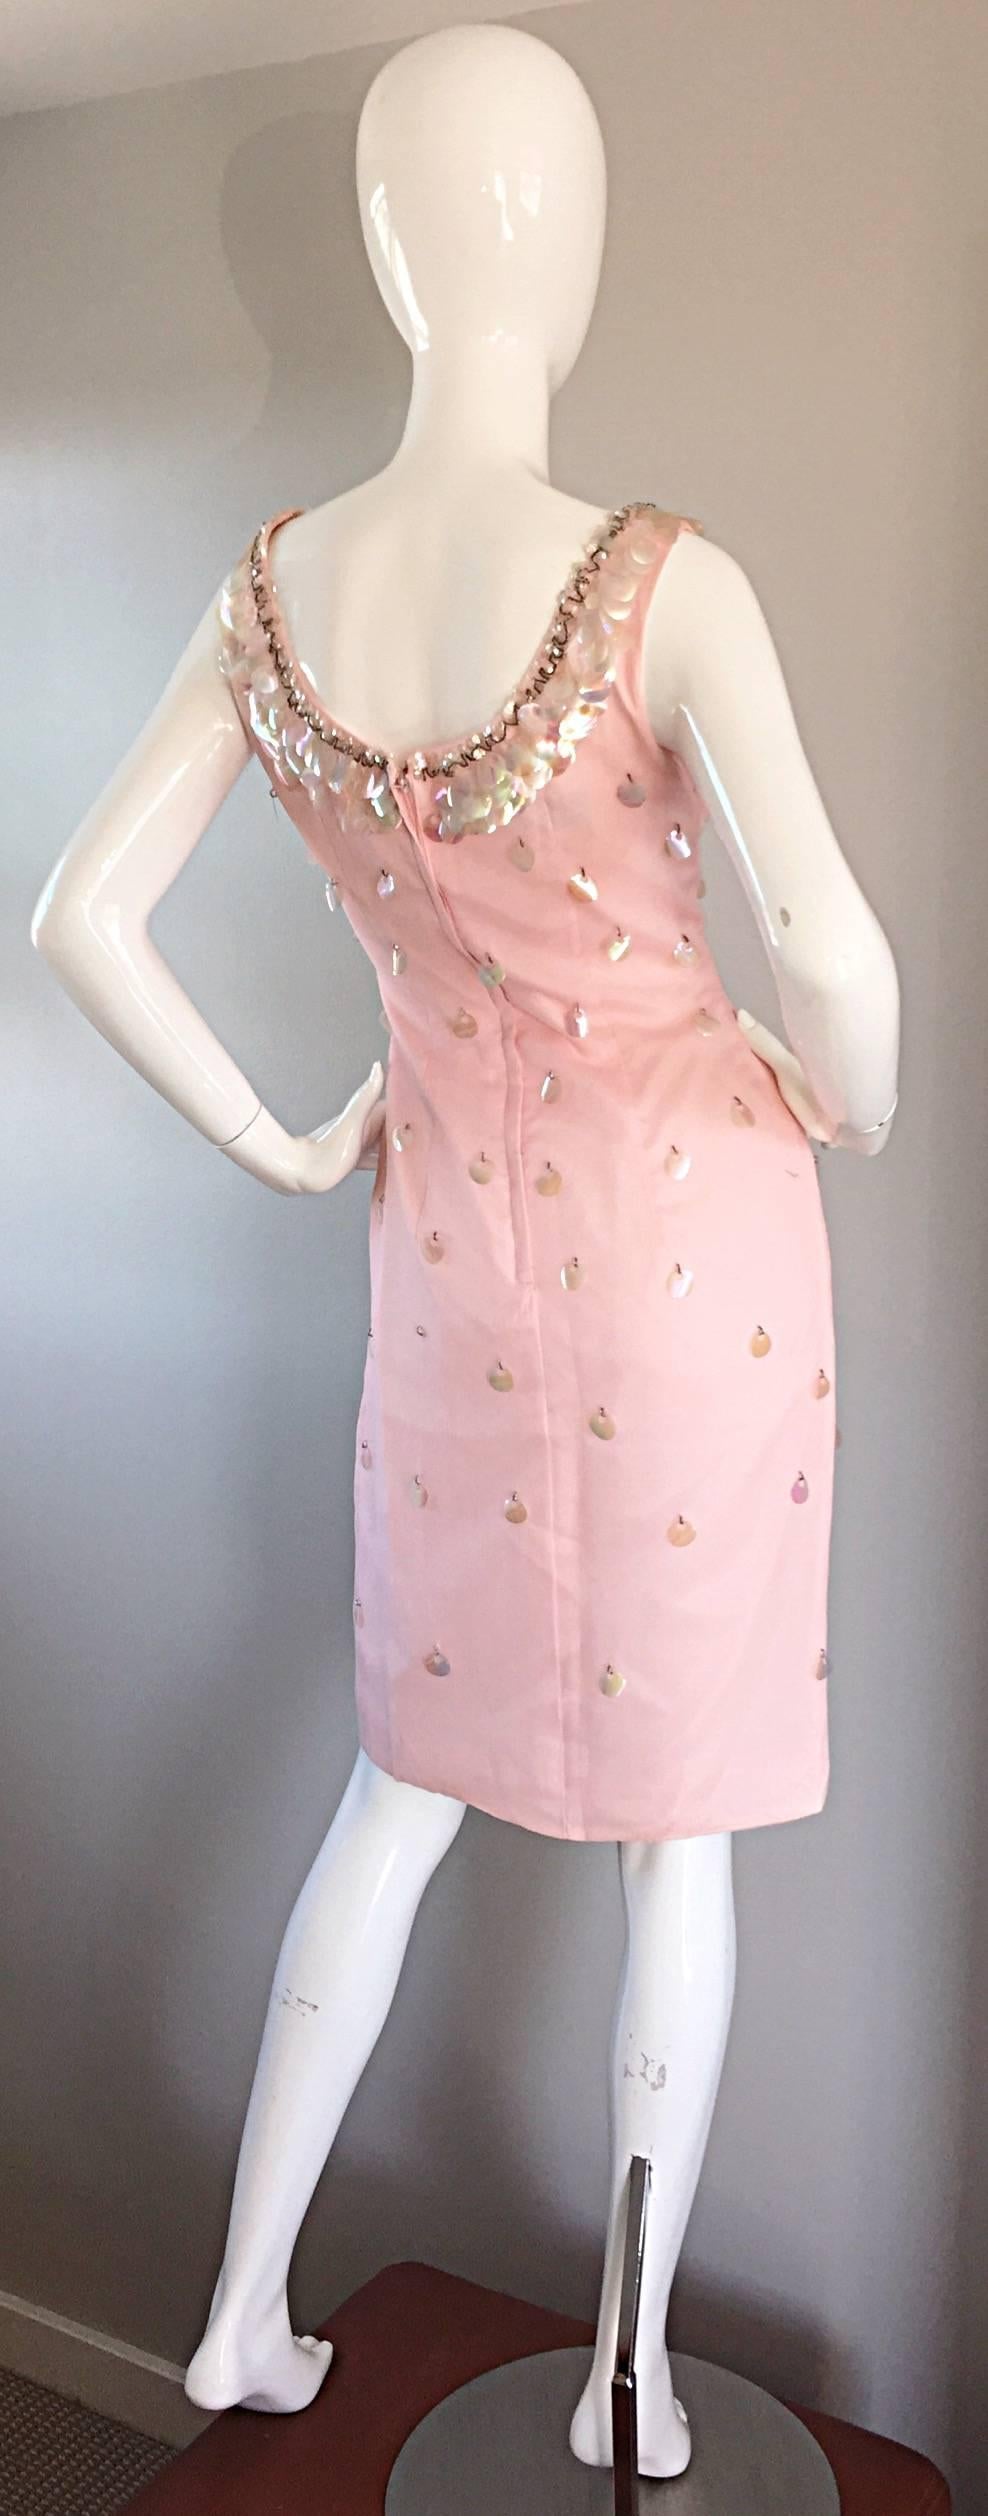 Sensational 1960s Lilli Diamond light pink chiffon dress, with pailletes, beads, and sequins embellished throughout. Brand new, with original store tags, this deadstock dress is simply divine in person! Beaded collar, with full metal zipper up the